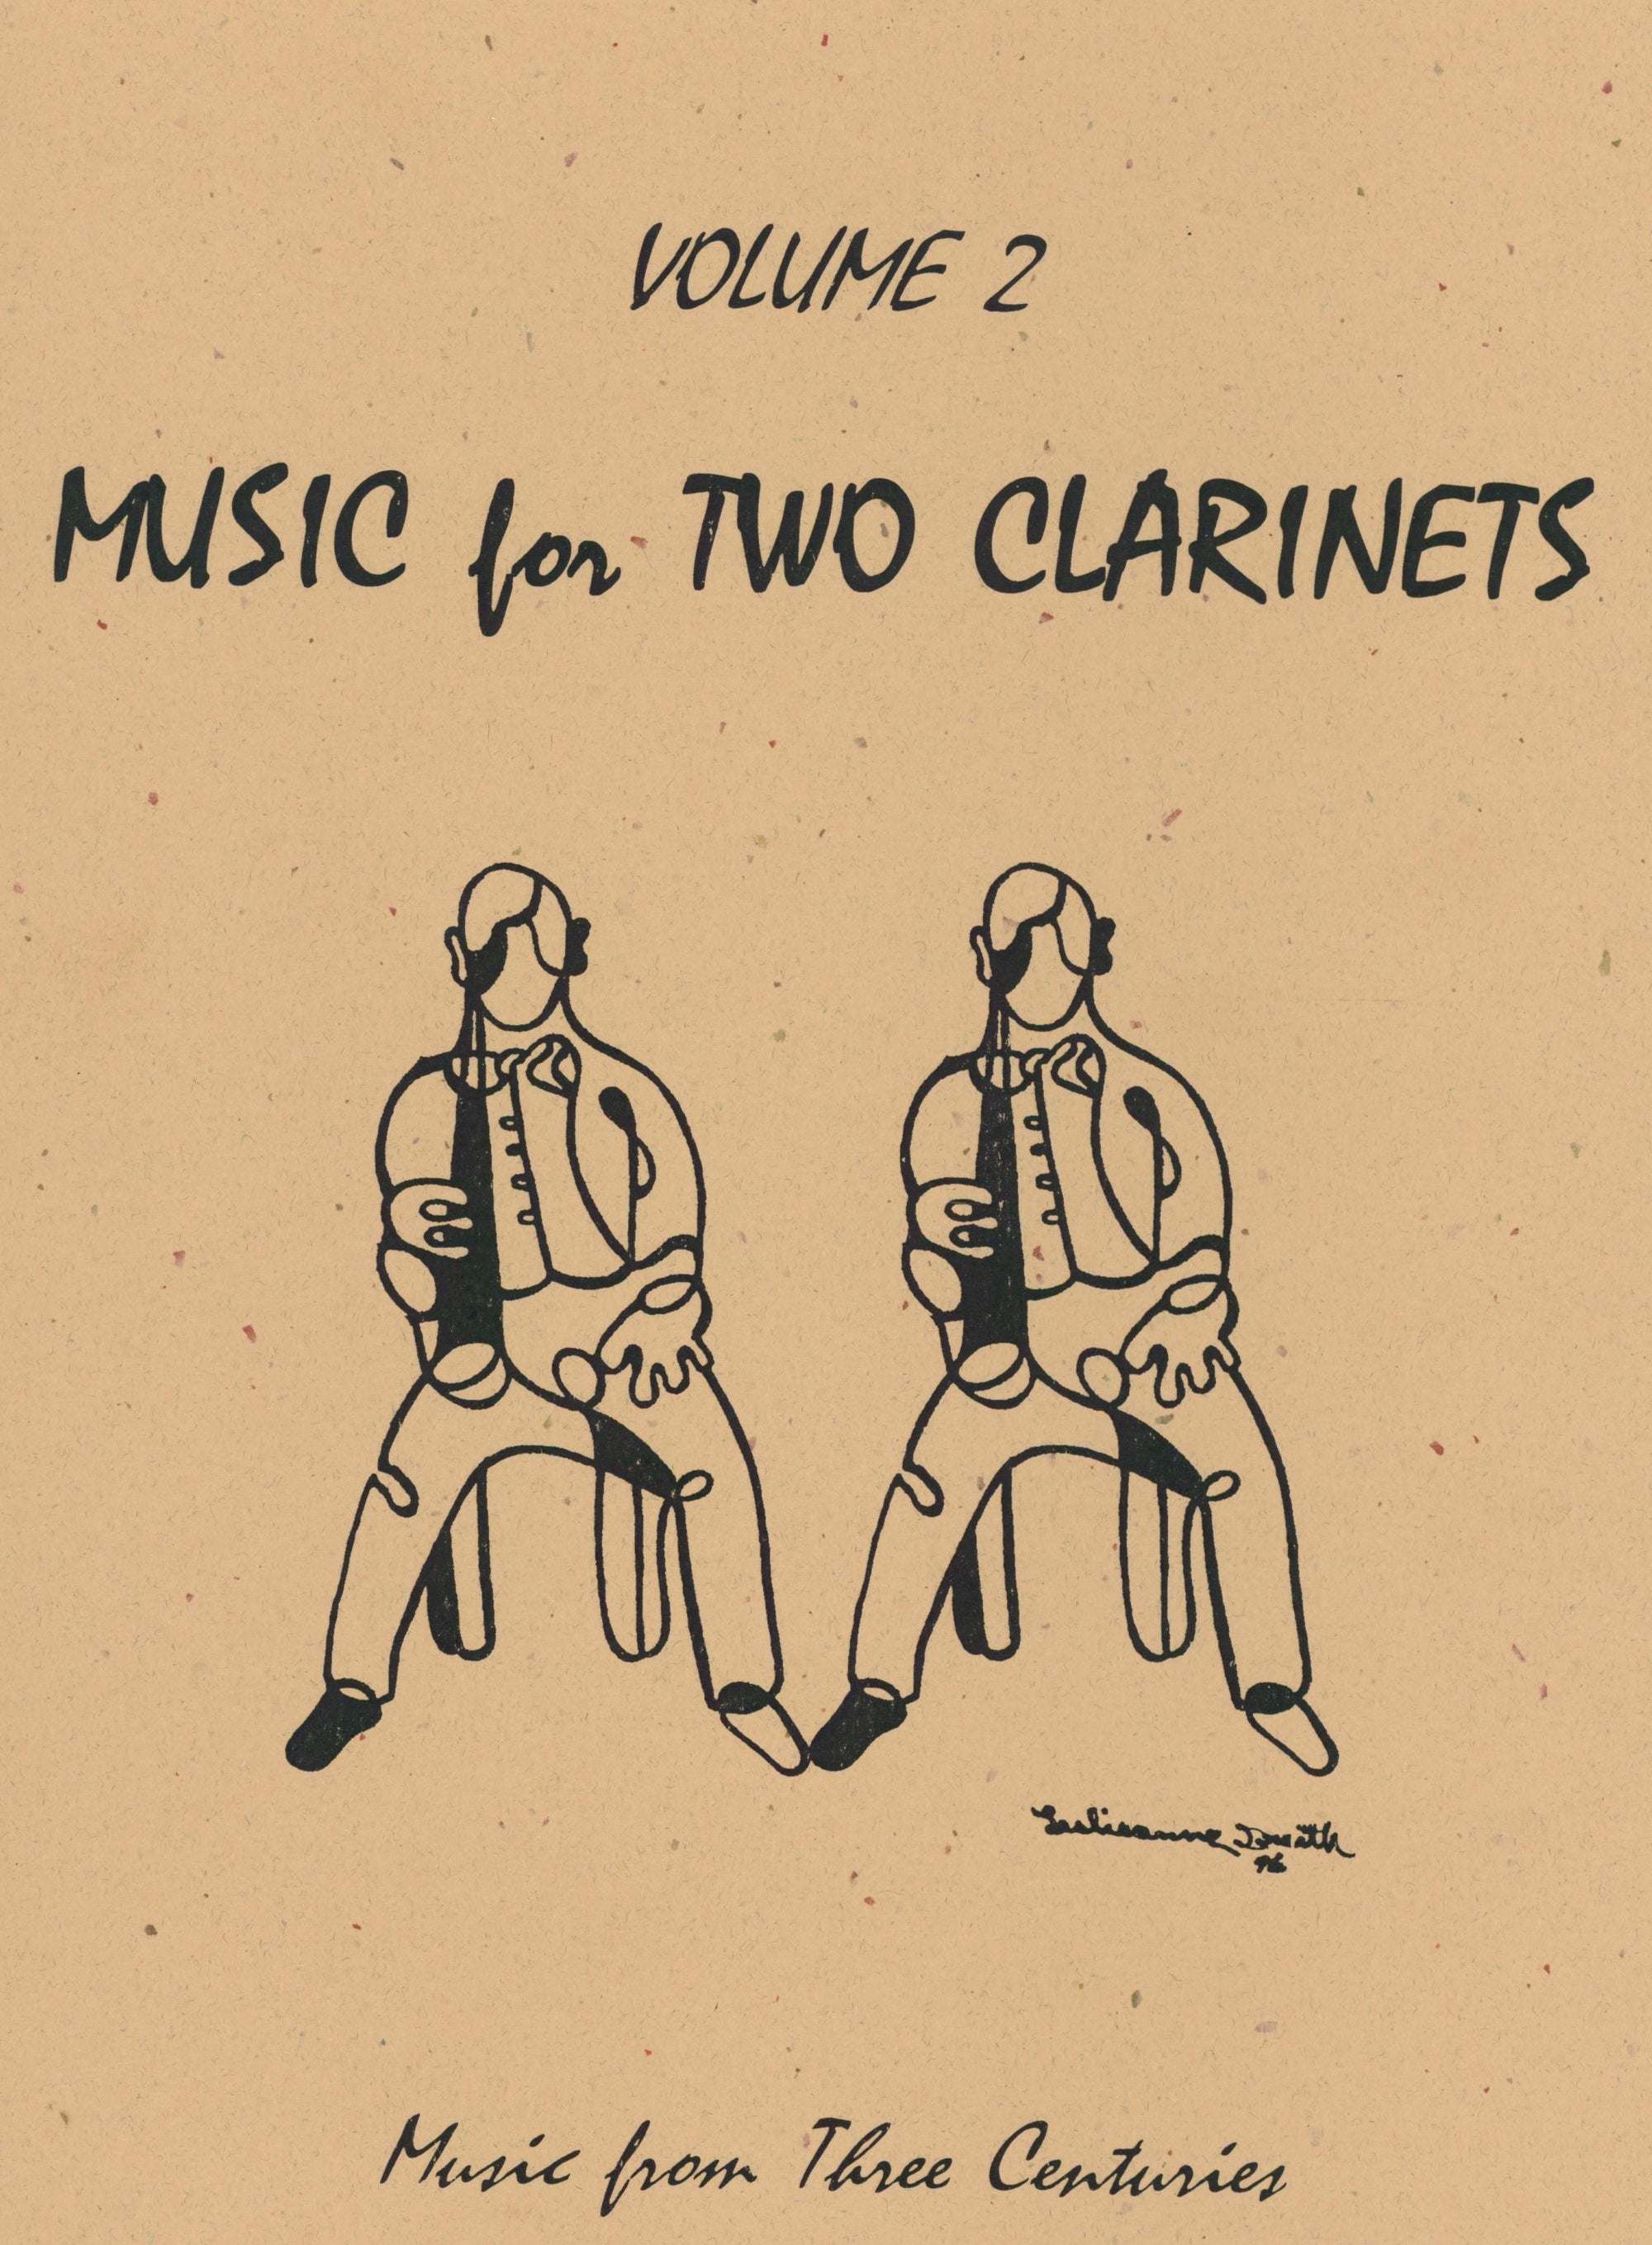 Music for Two Clarinets - Volume 2